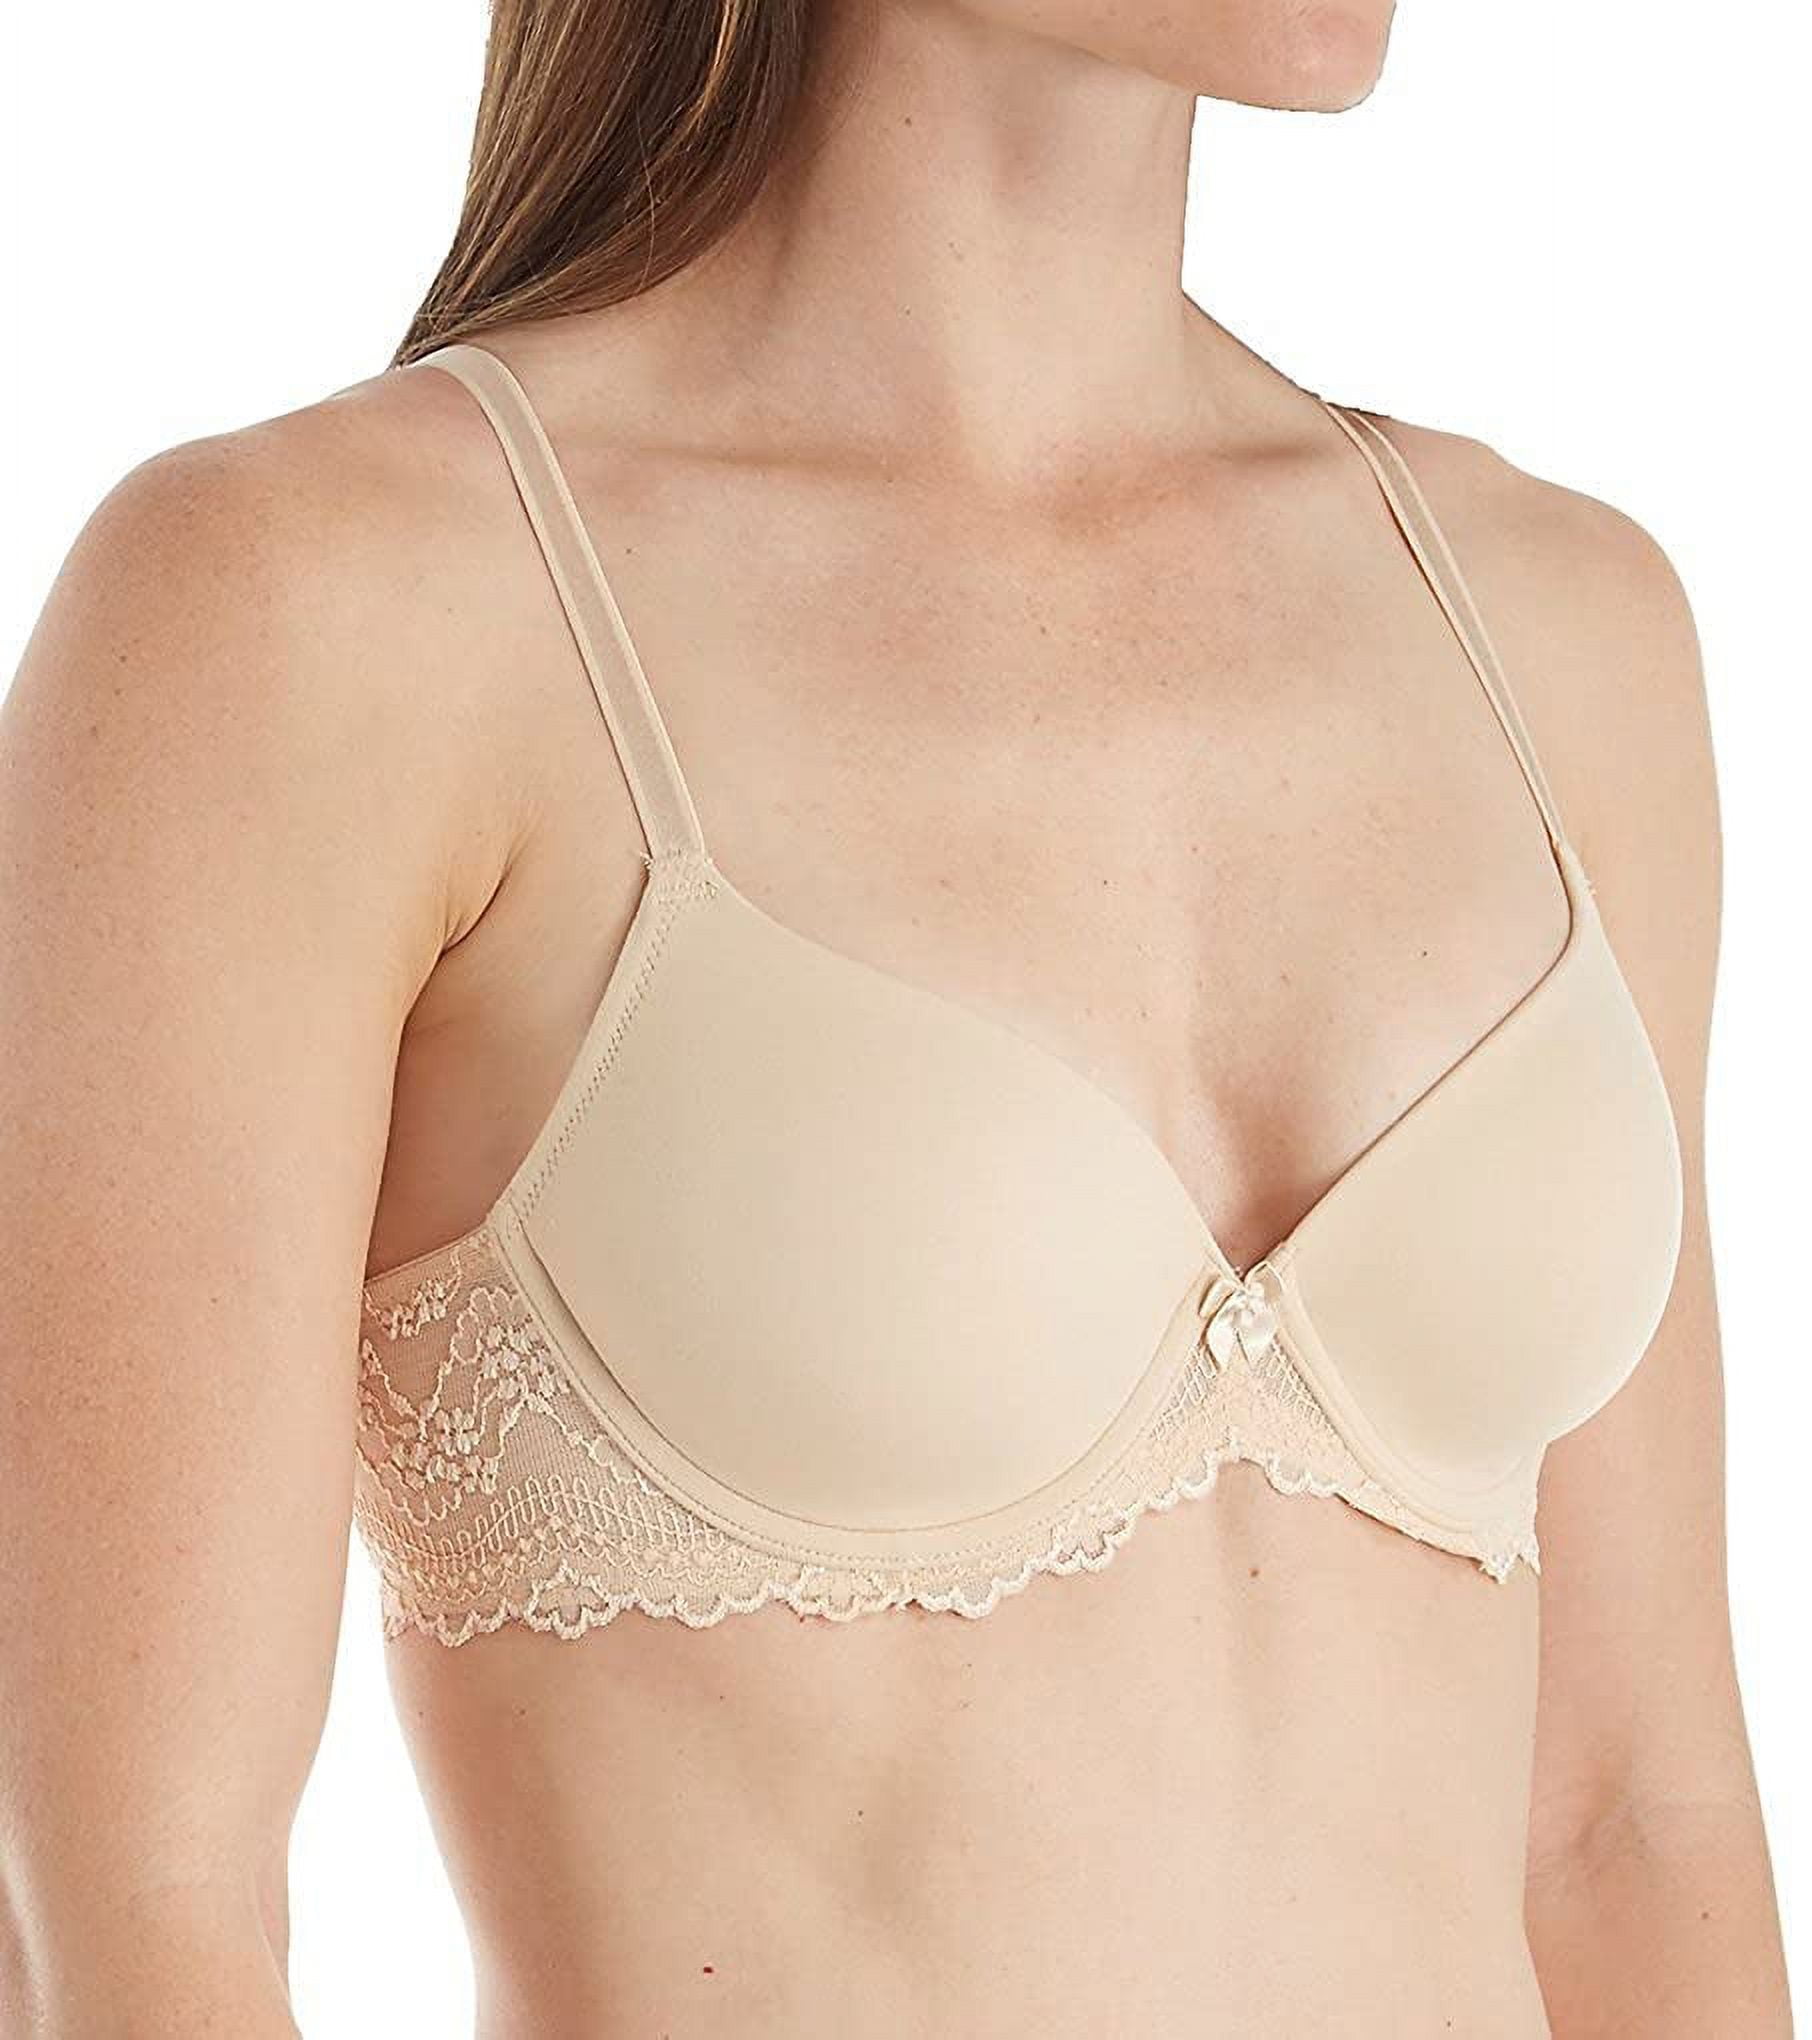 DOMINIQUE Nude Lacee Everyday Contour T-Shirt Bra, US 34DD, UK 34DD, NWOT 